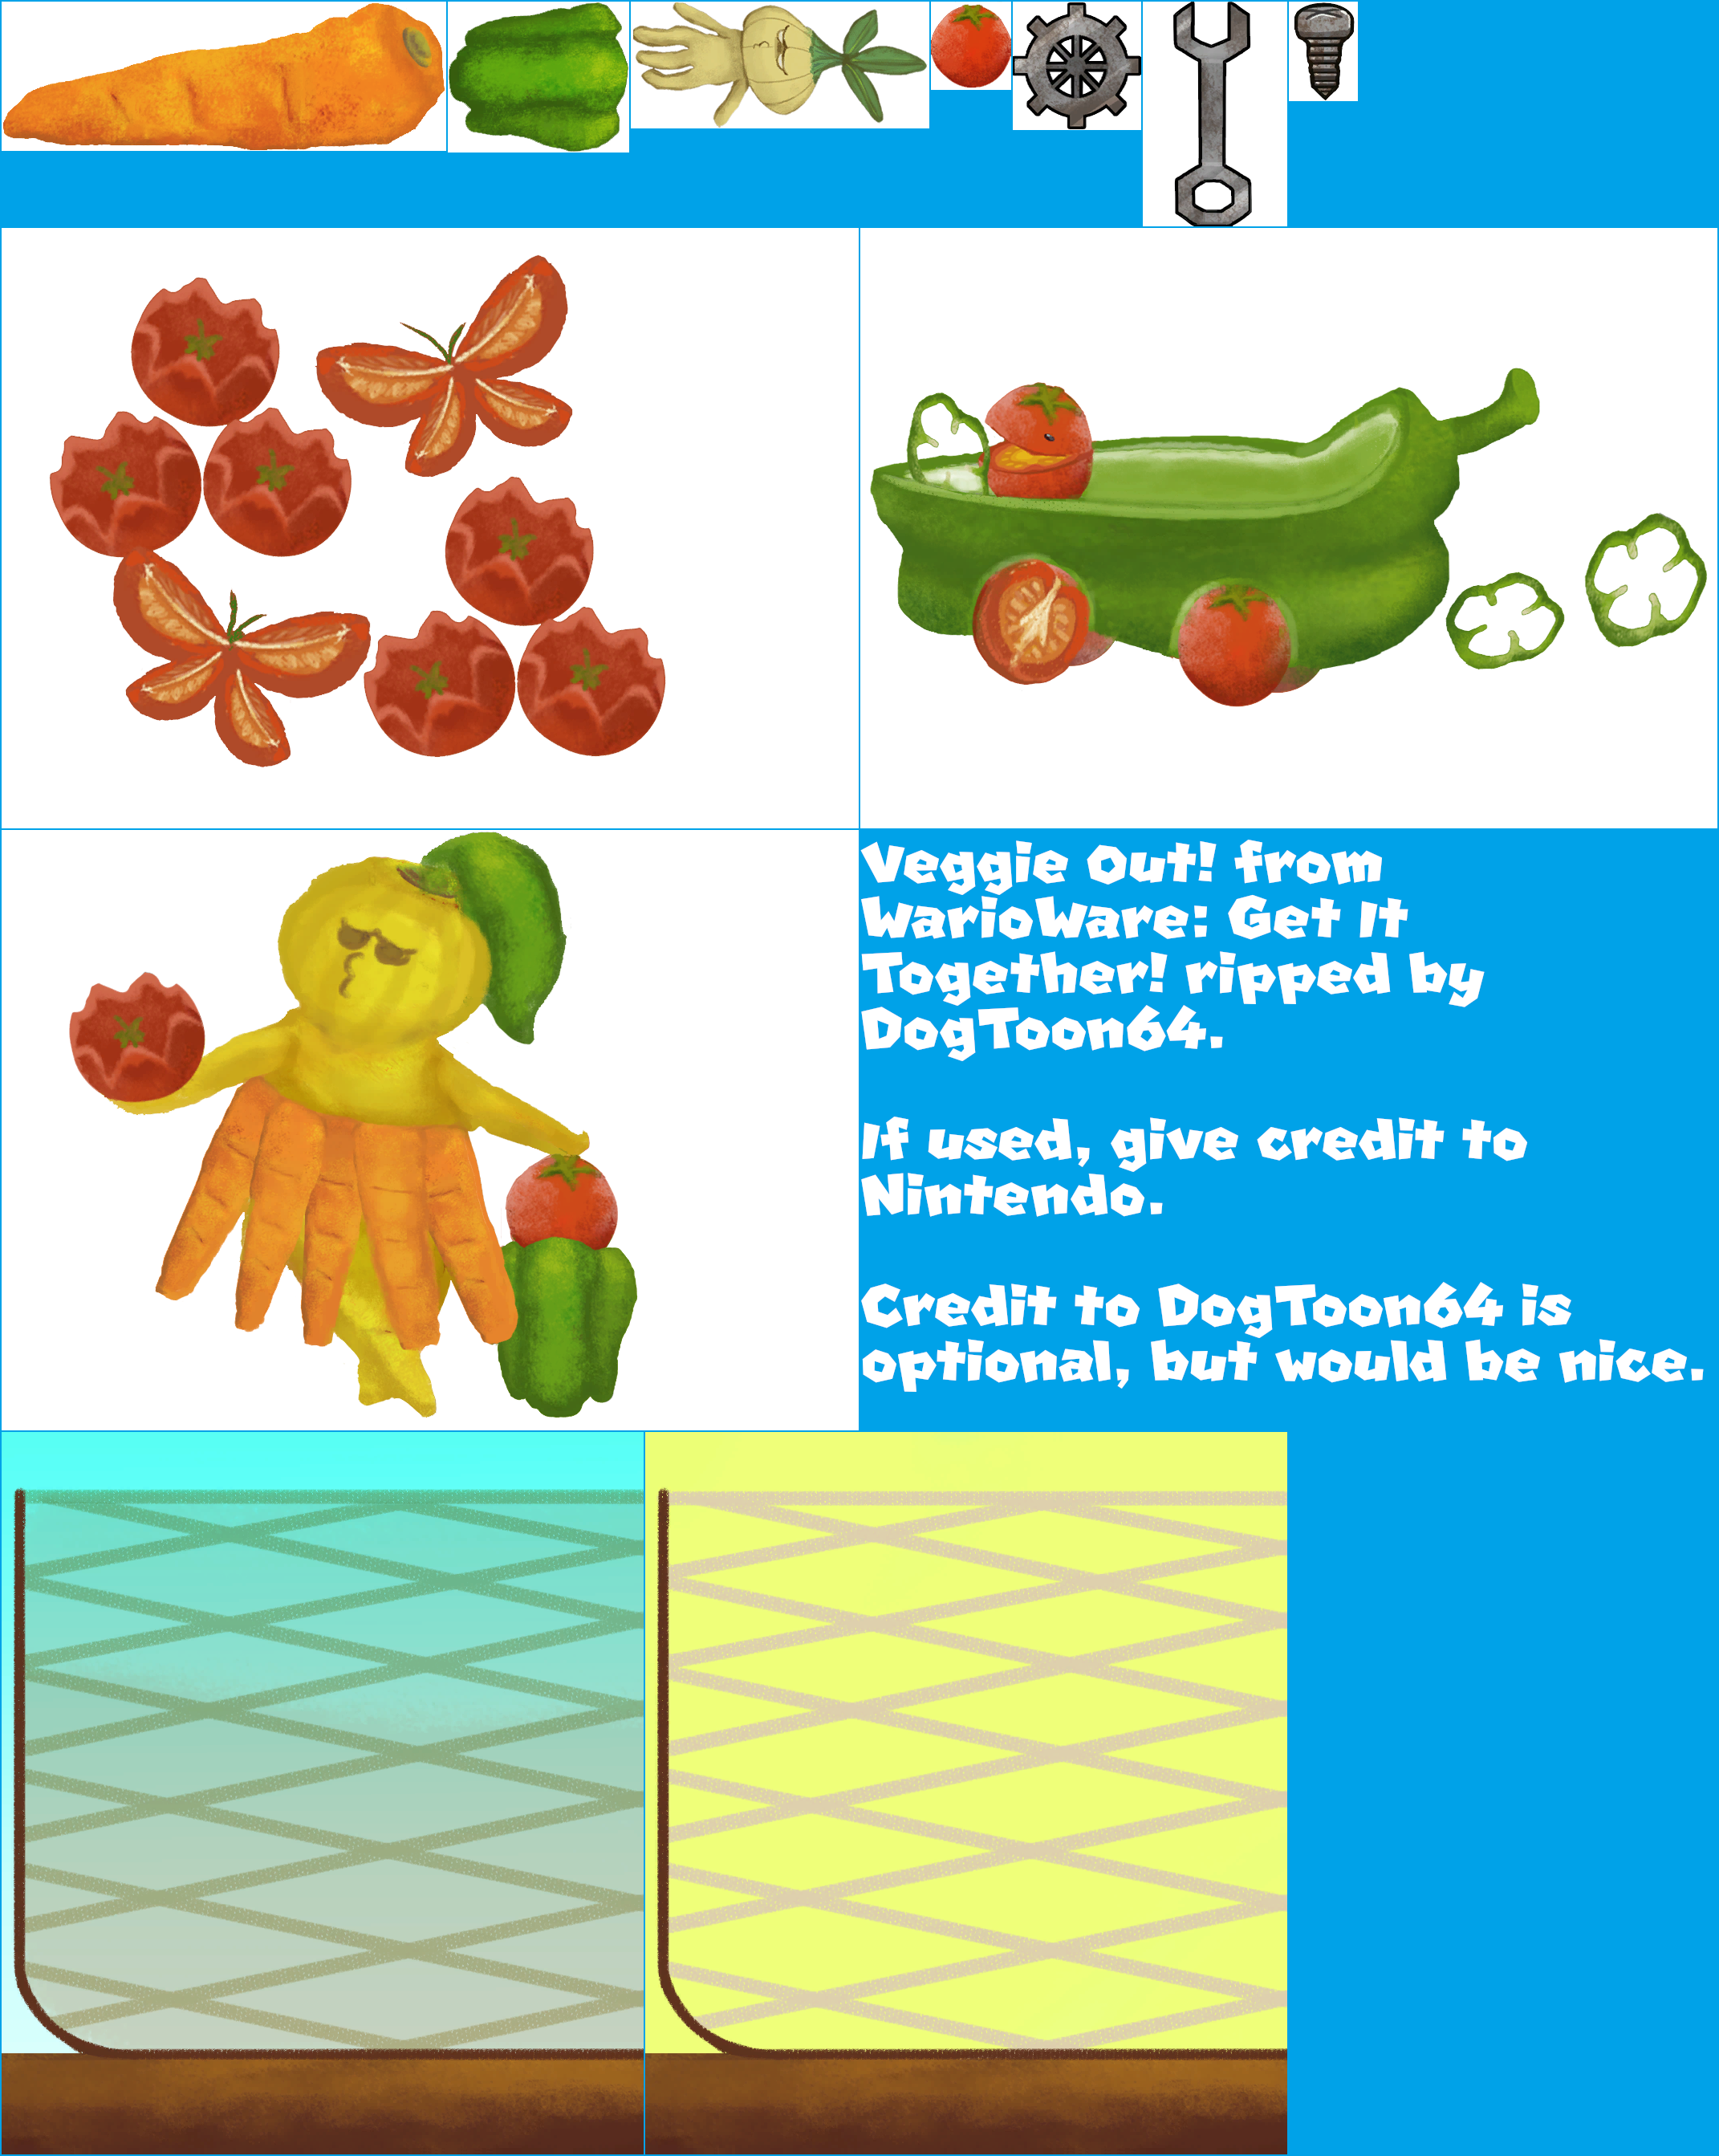 WarioWare: Get It Together! - Veggie Out!